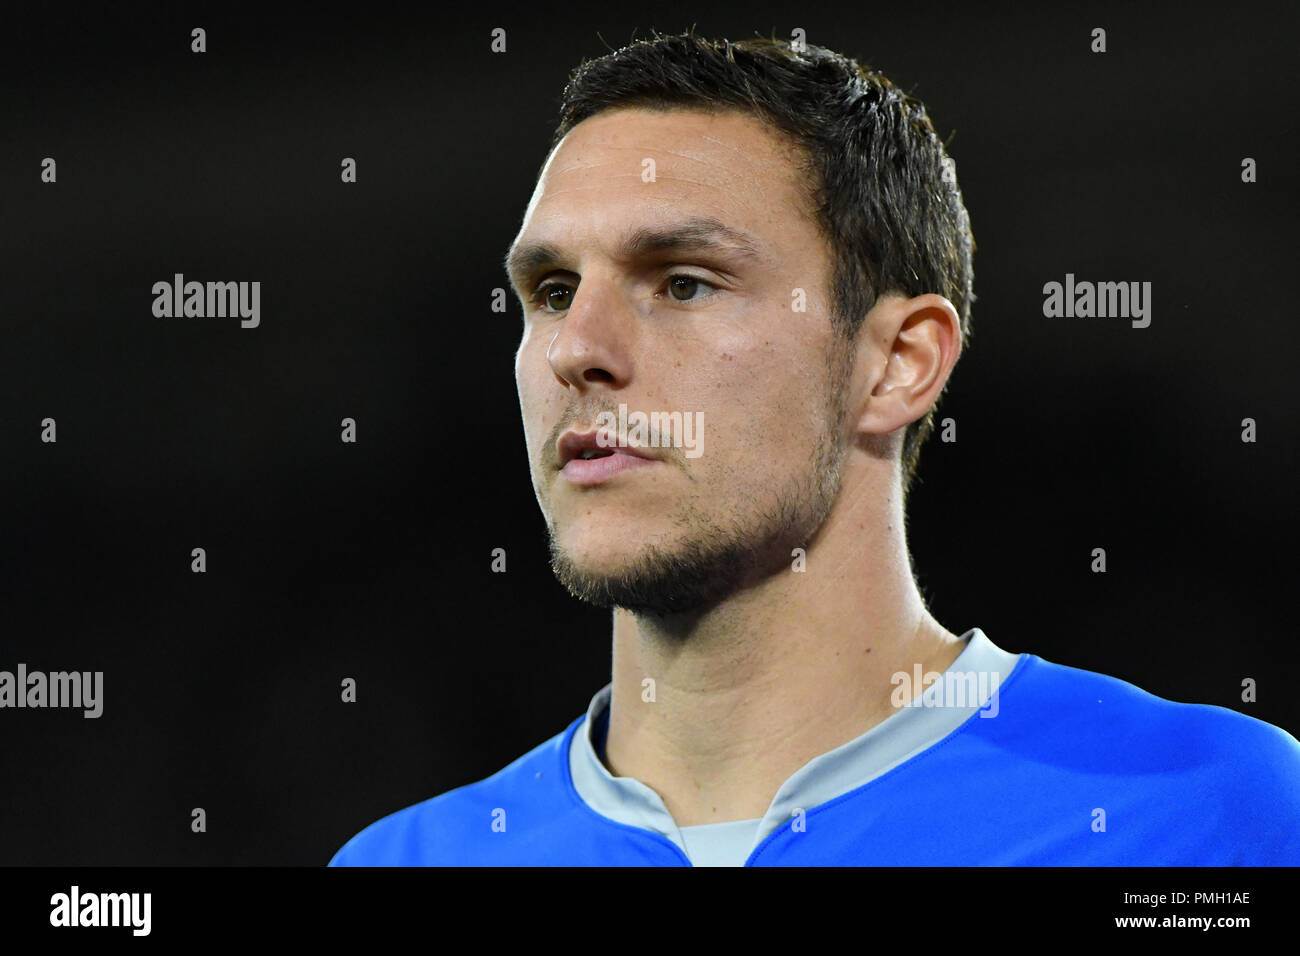 Alex McCarthy of Southampton - Southampton v Brighton & Hove Albion, Premier League, St Mary's Stadium, Southampton - 17th September 2018  STRICTLY EDITORIAL USE ONLY - DataCo rules apply - The use of this image in a commercial context is strictly prohibited unless express permission has been given by the club(s) concerned. Examples of commercial usage include, but are not limited to, use in betting and gaming, marketing and advertising products. No use with unauthorised audio, video, data, fixture lists, club and or league logos or services including those listed as 'live' Stock Photo